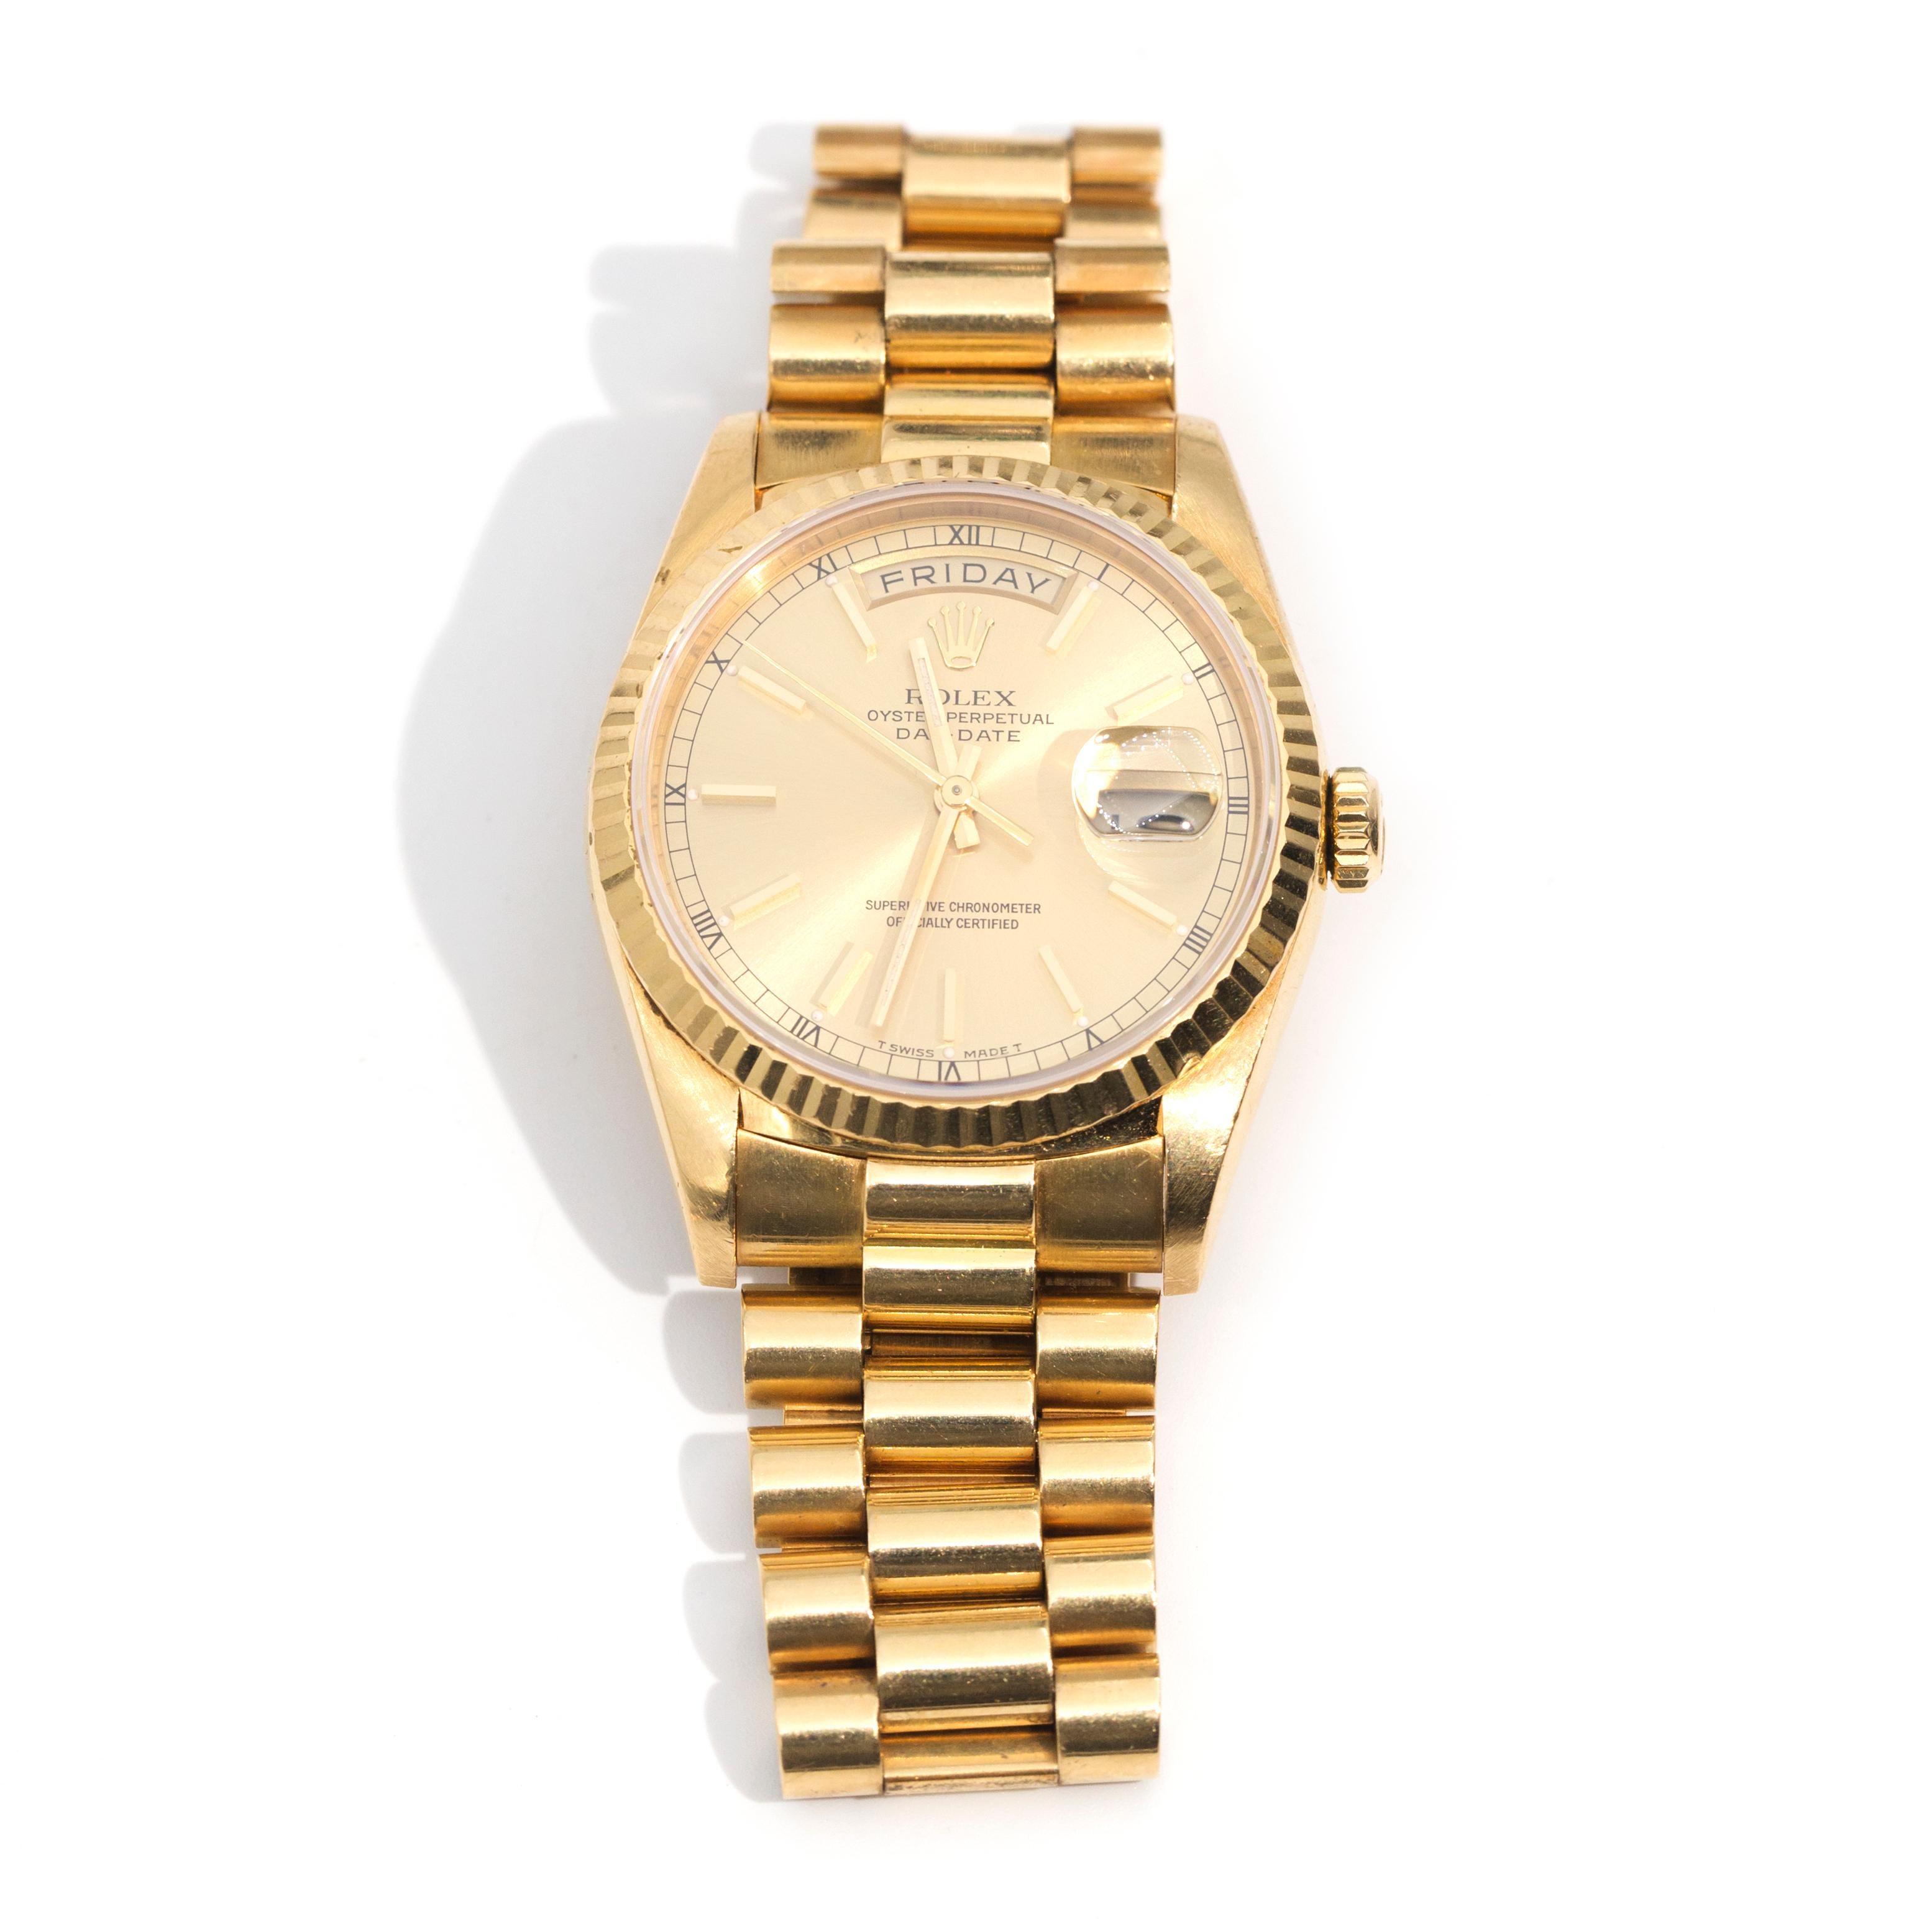 18 carat solid gold Rolex Day-Date President, automatic movement/caliber 3155, 31 jewels, model 18238, 36 millimetre case, champagne dial, gold hands, gold baton hour markers with a luminescent dot to the inner end with black printed Roman numeral